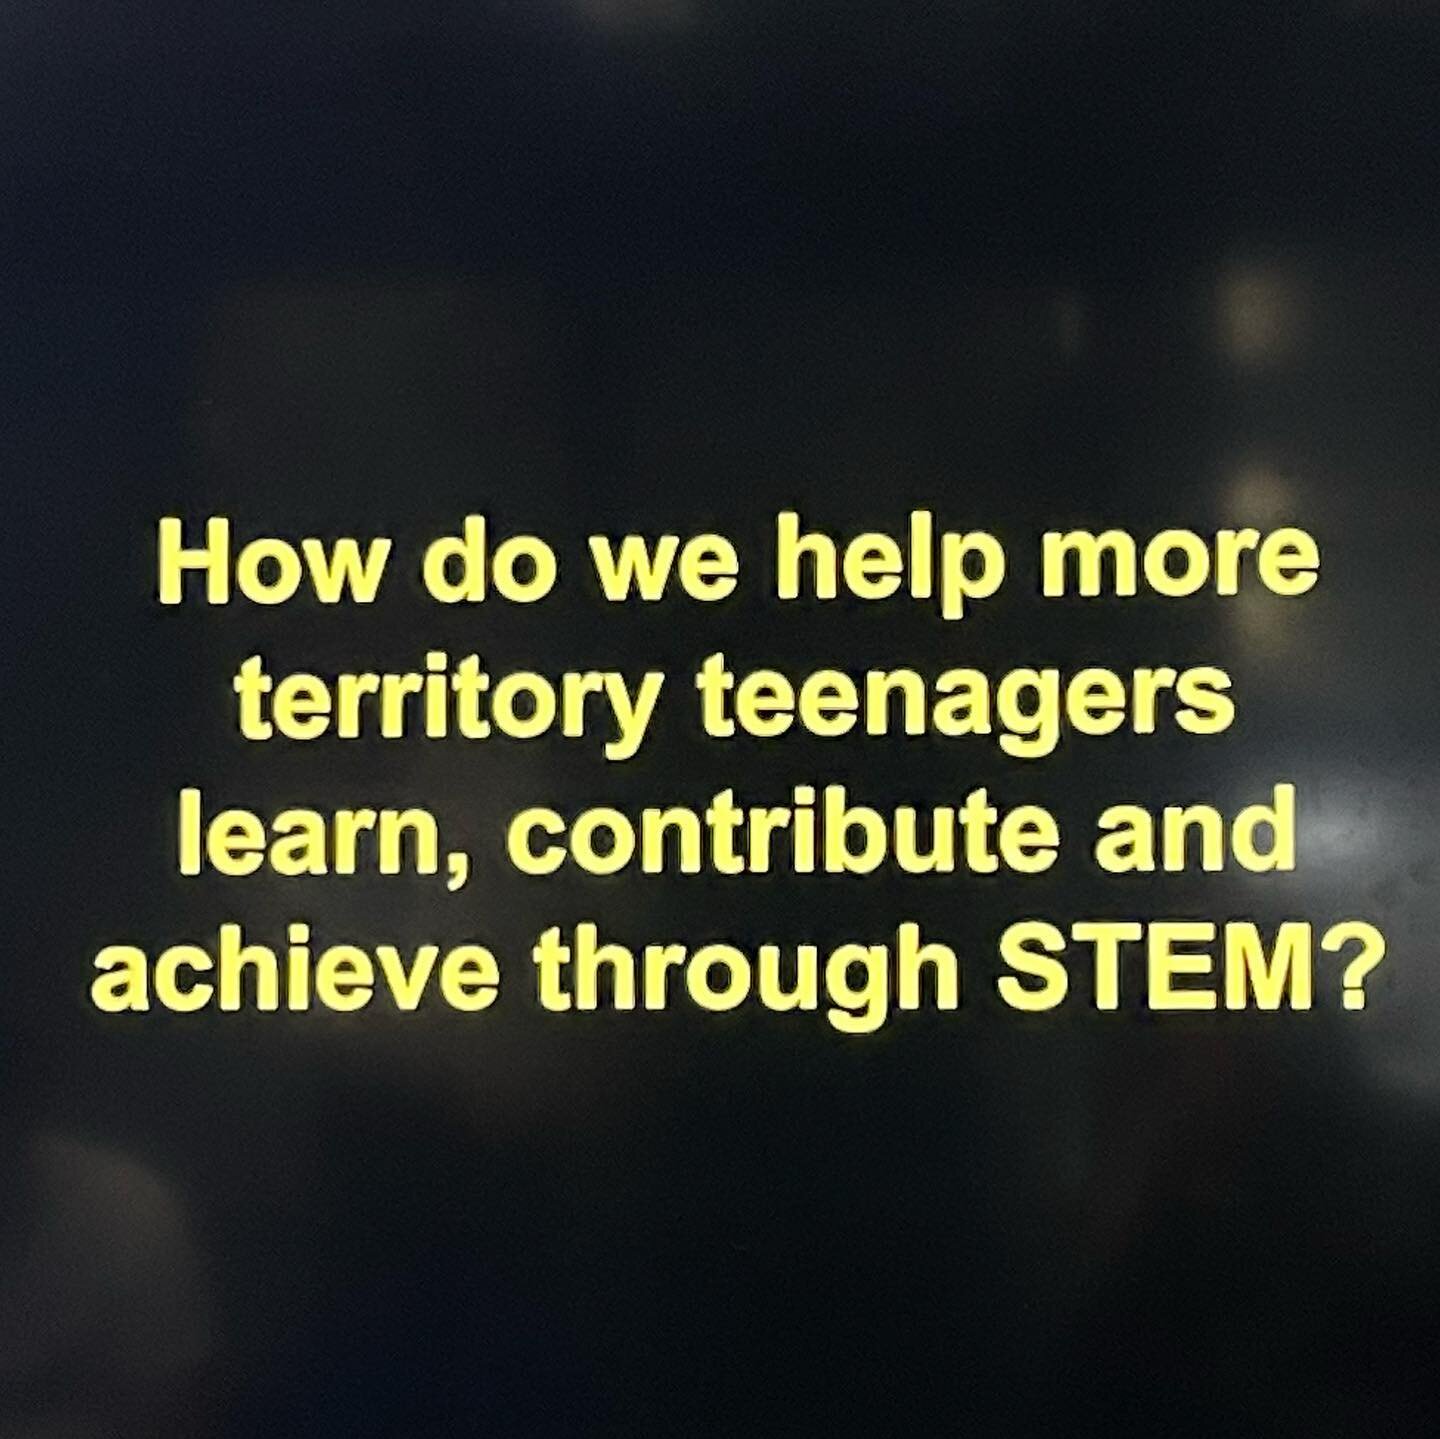 Yesterday I was lucky enough to be a part of the NextGen Youth STEM Symposium where leaders in education and innovation explored  how we could best engage more Territory teens in STEM. The event held at the Darwin Innovation Hub was live streamed to 